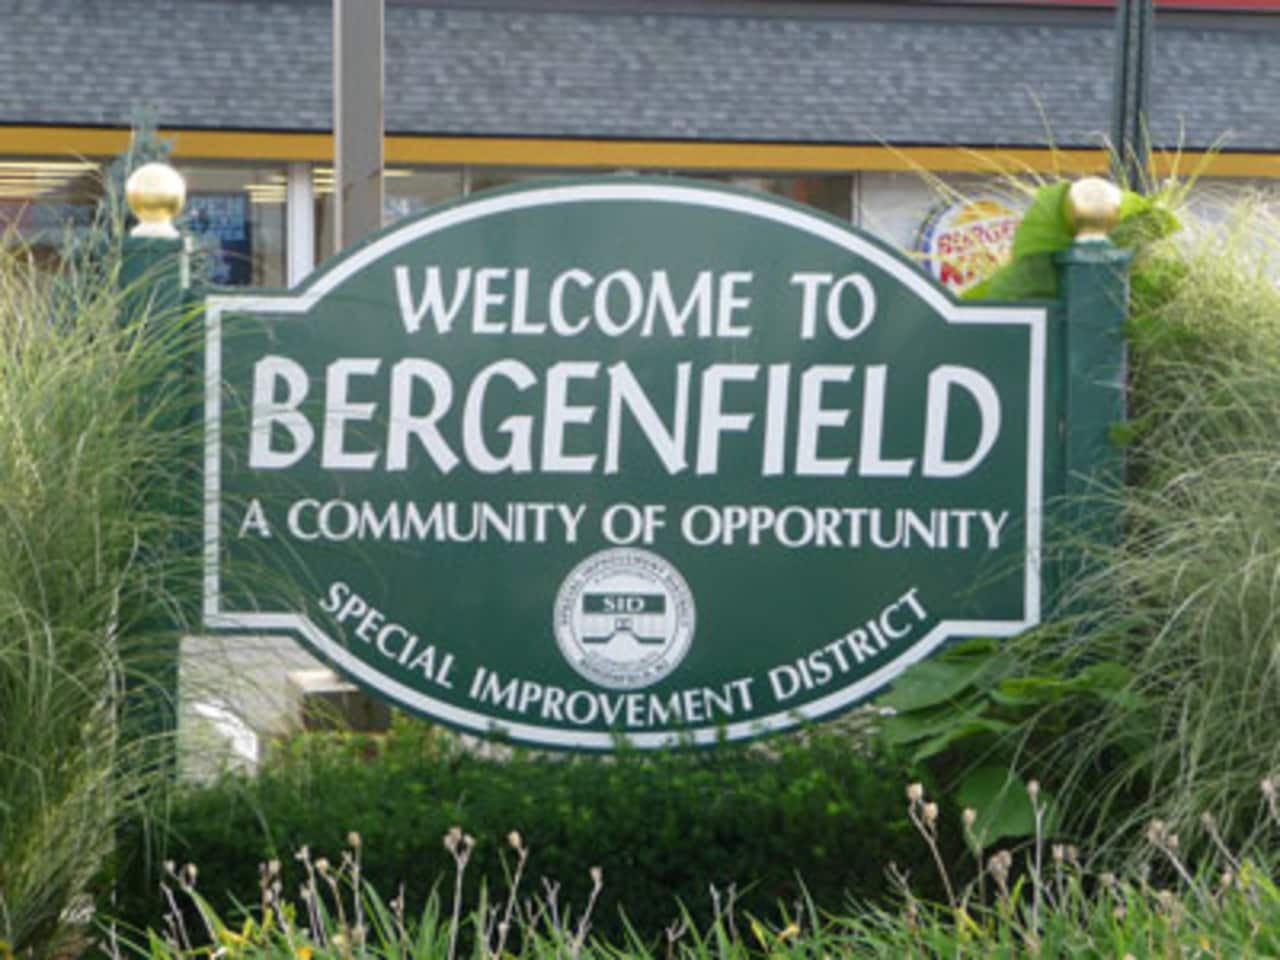 Bergenfield has been named the second-best place in New Jersey to raise children